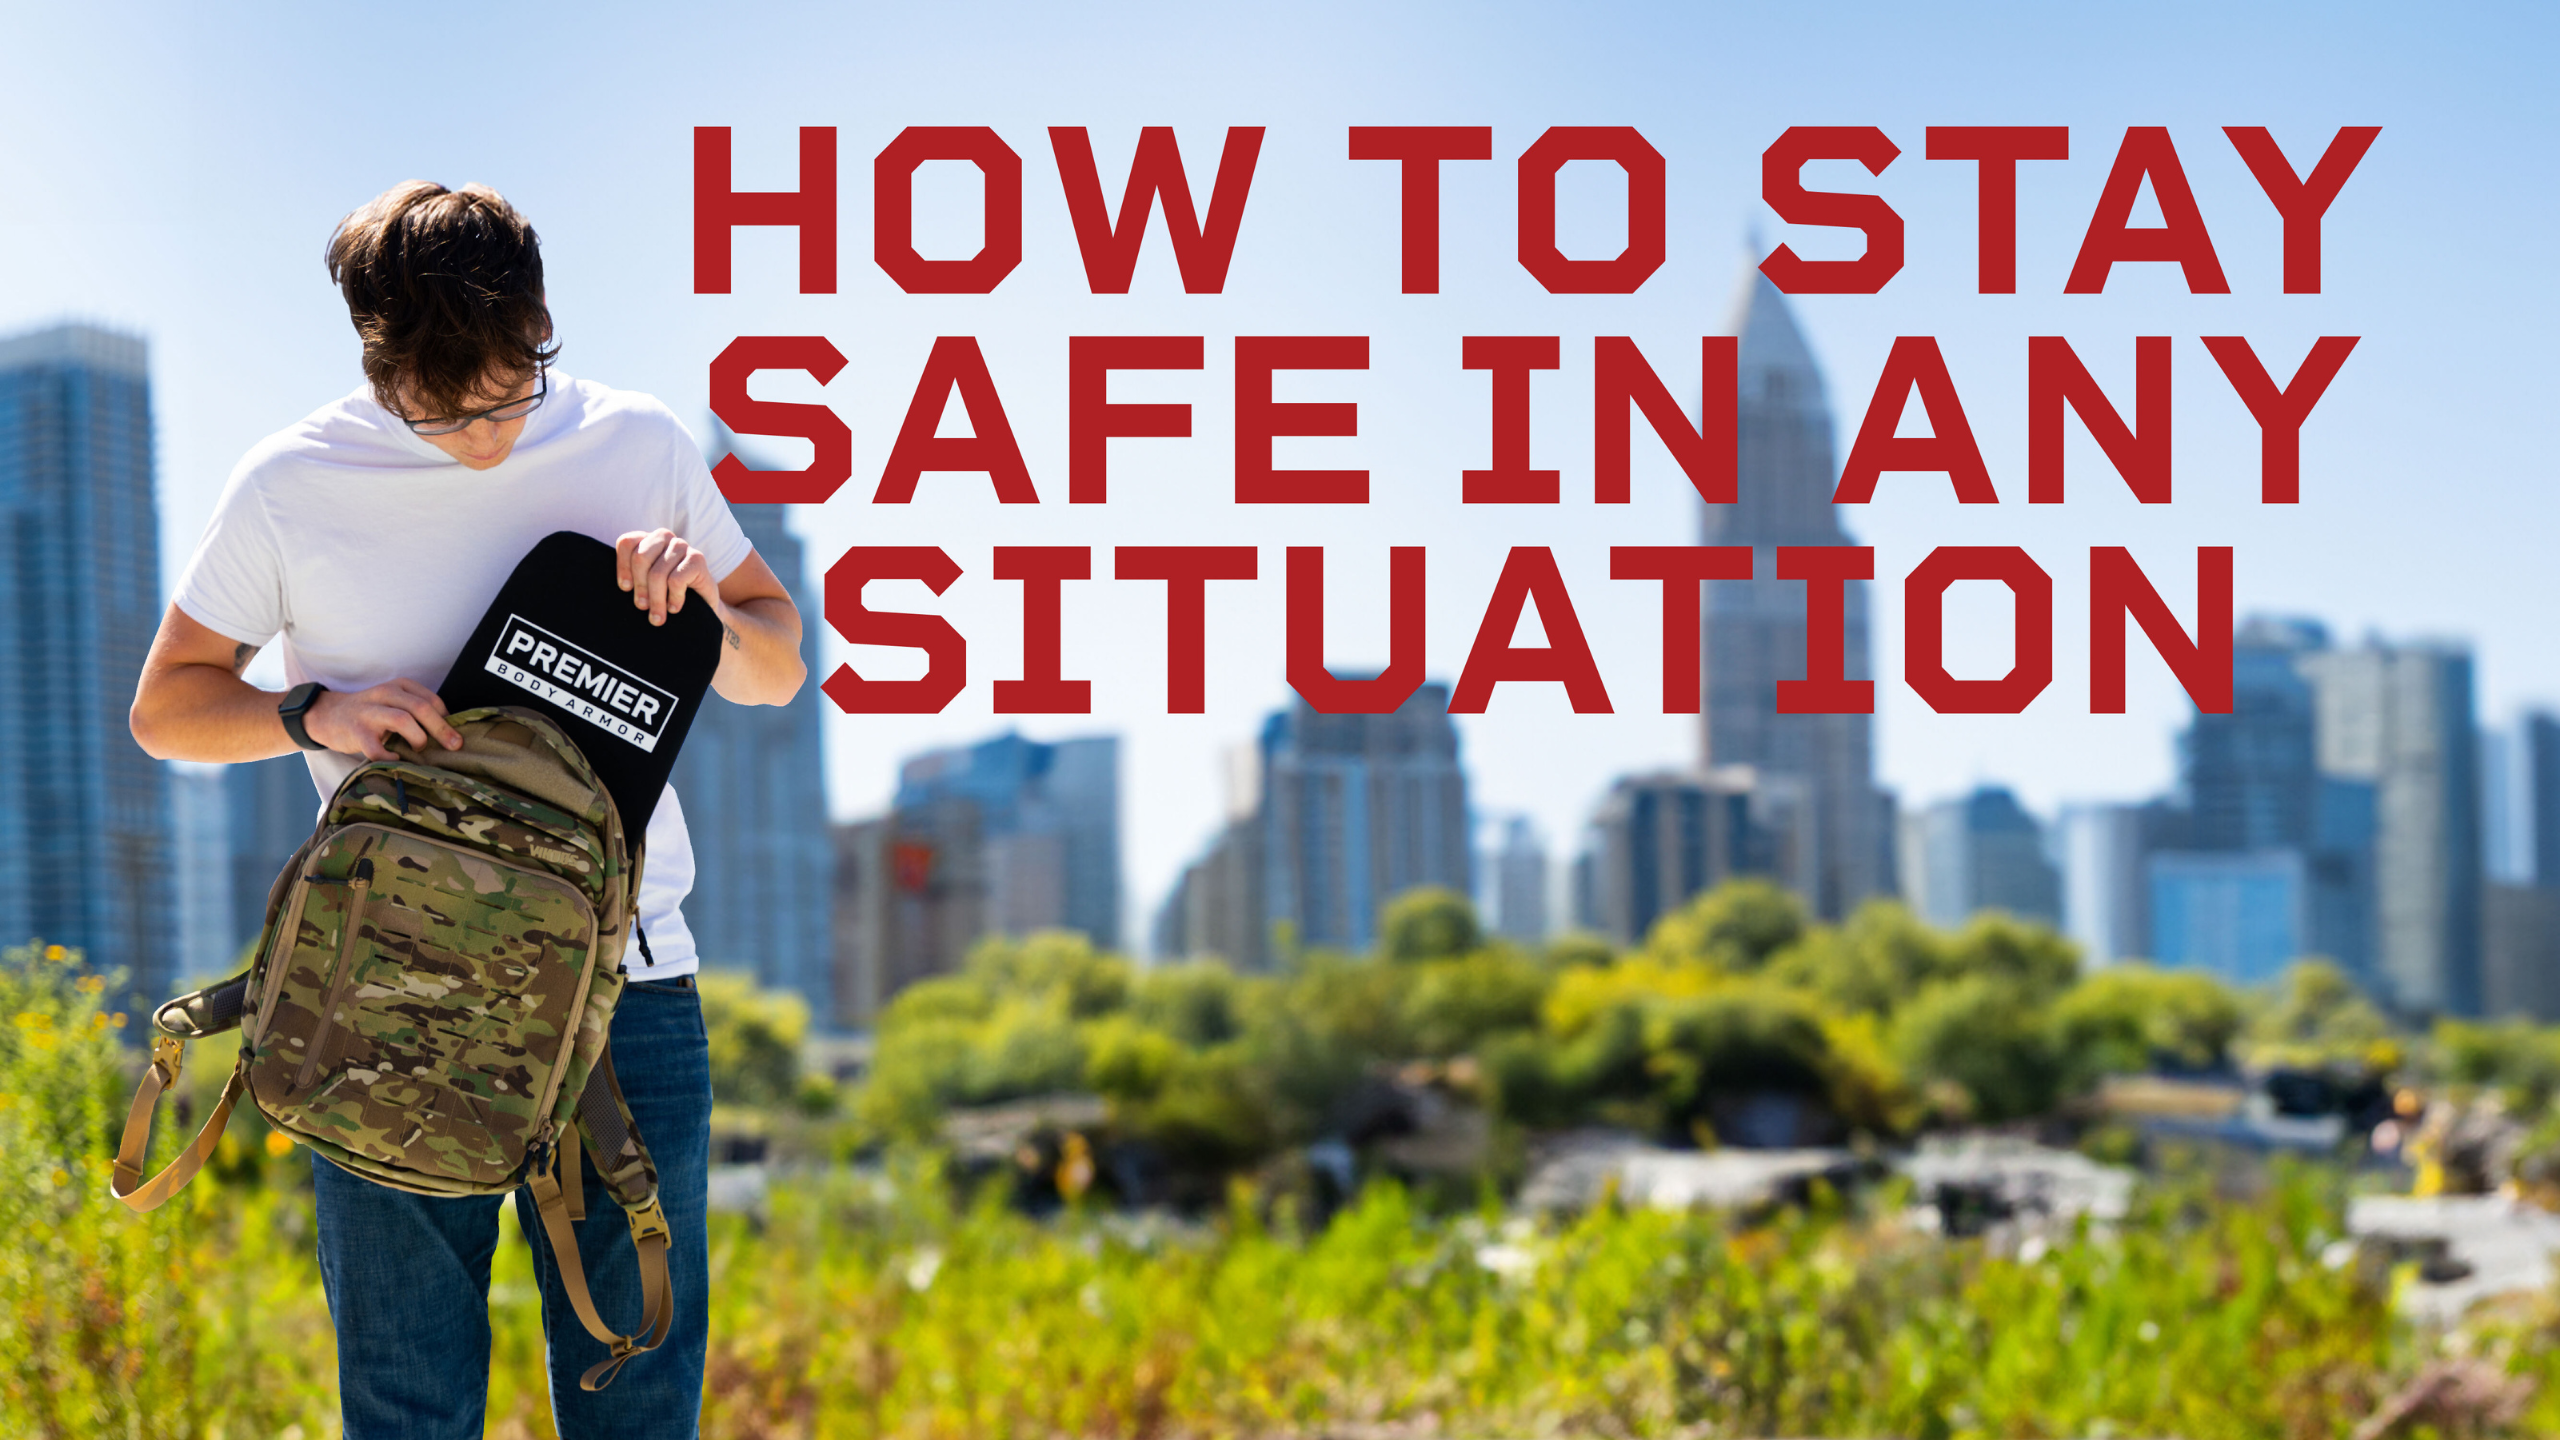 man with bookbag and body armor insert with title "how to stay safe in any situation"